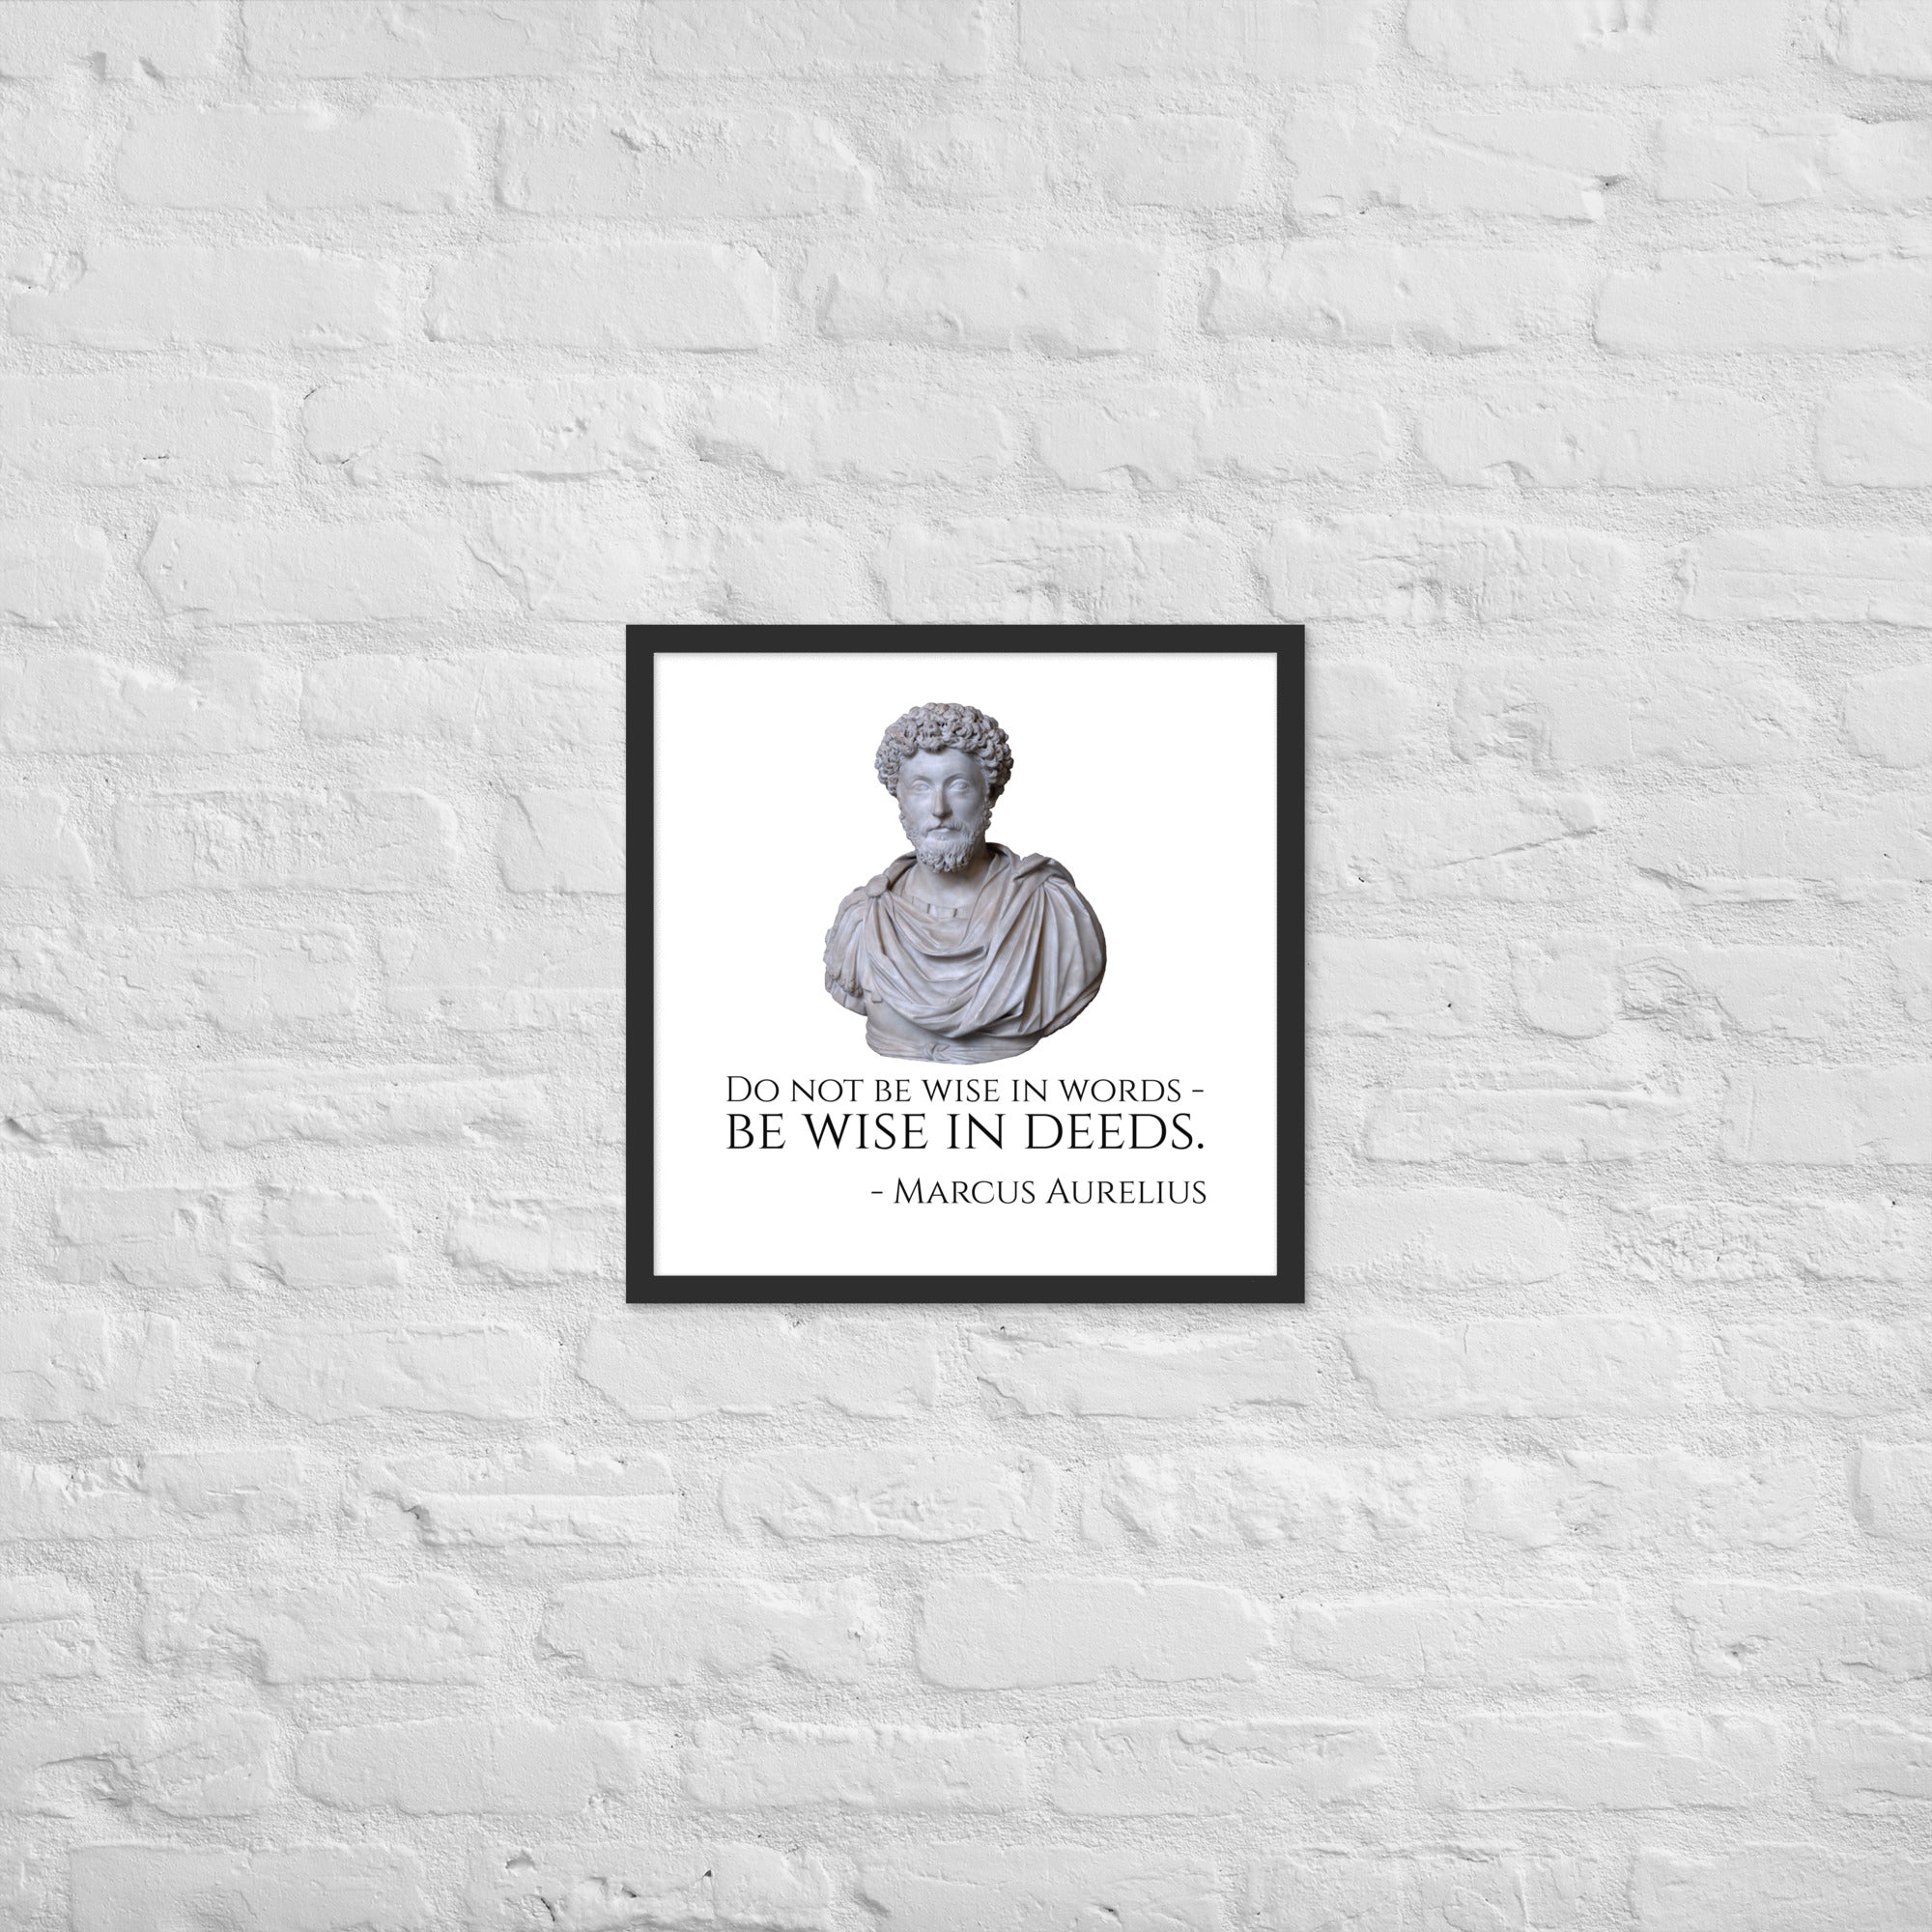 Do Not Be Wise In Words - Be Wise In Deeds. - Marcus Aurelius - Stoic Philosophy Framed poster